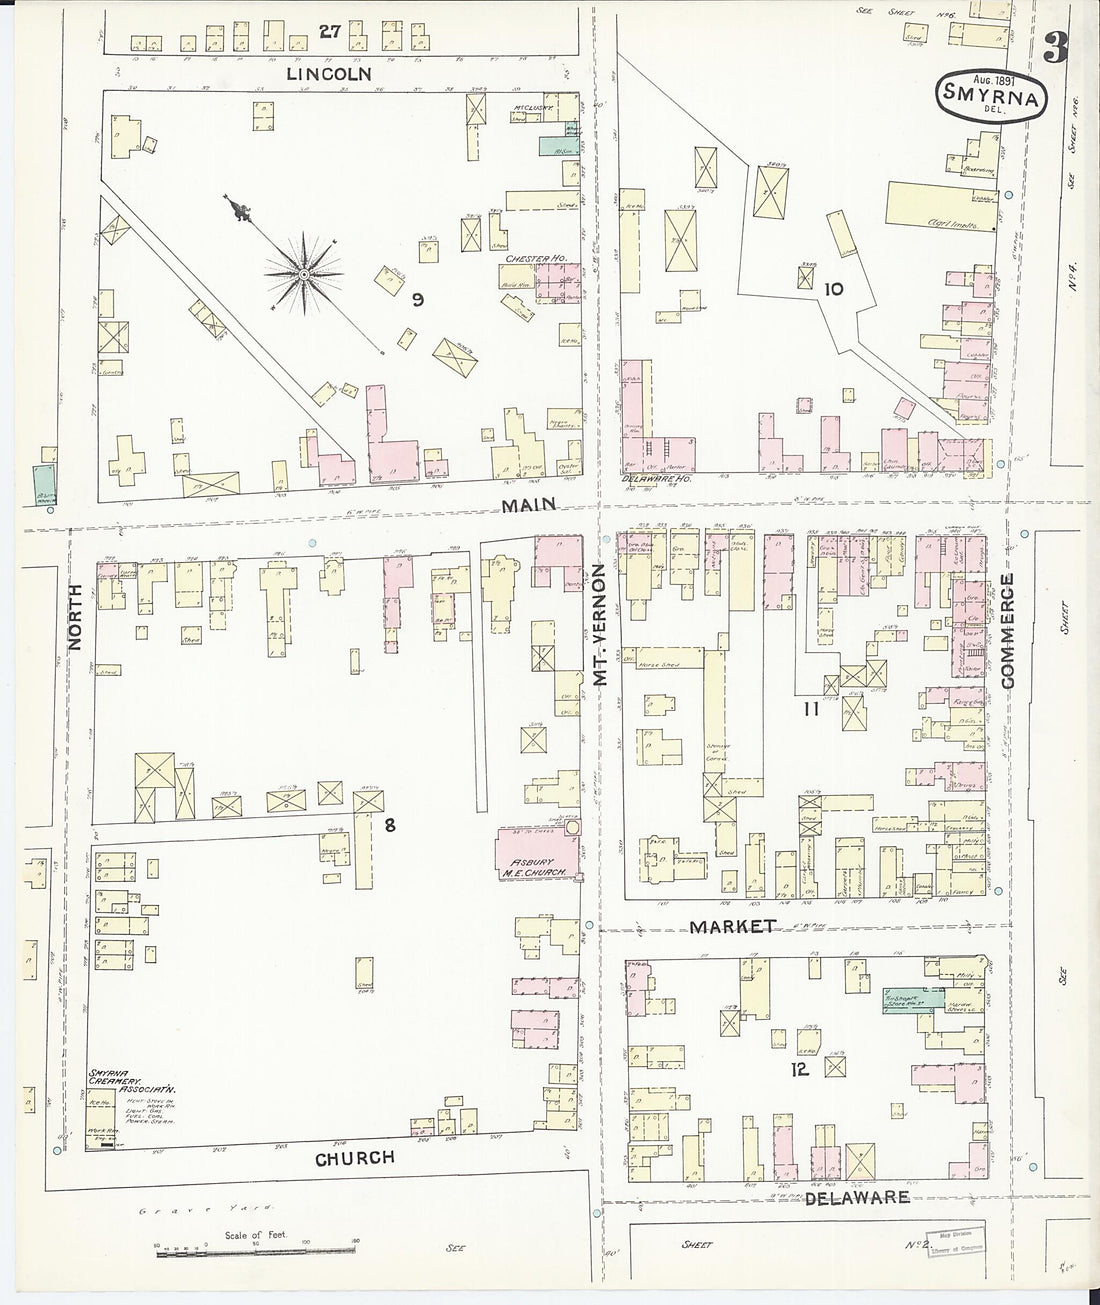 This old map of Smyrna, Kent County, Delaware was created by Sanborn Map Company in 1891